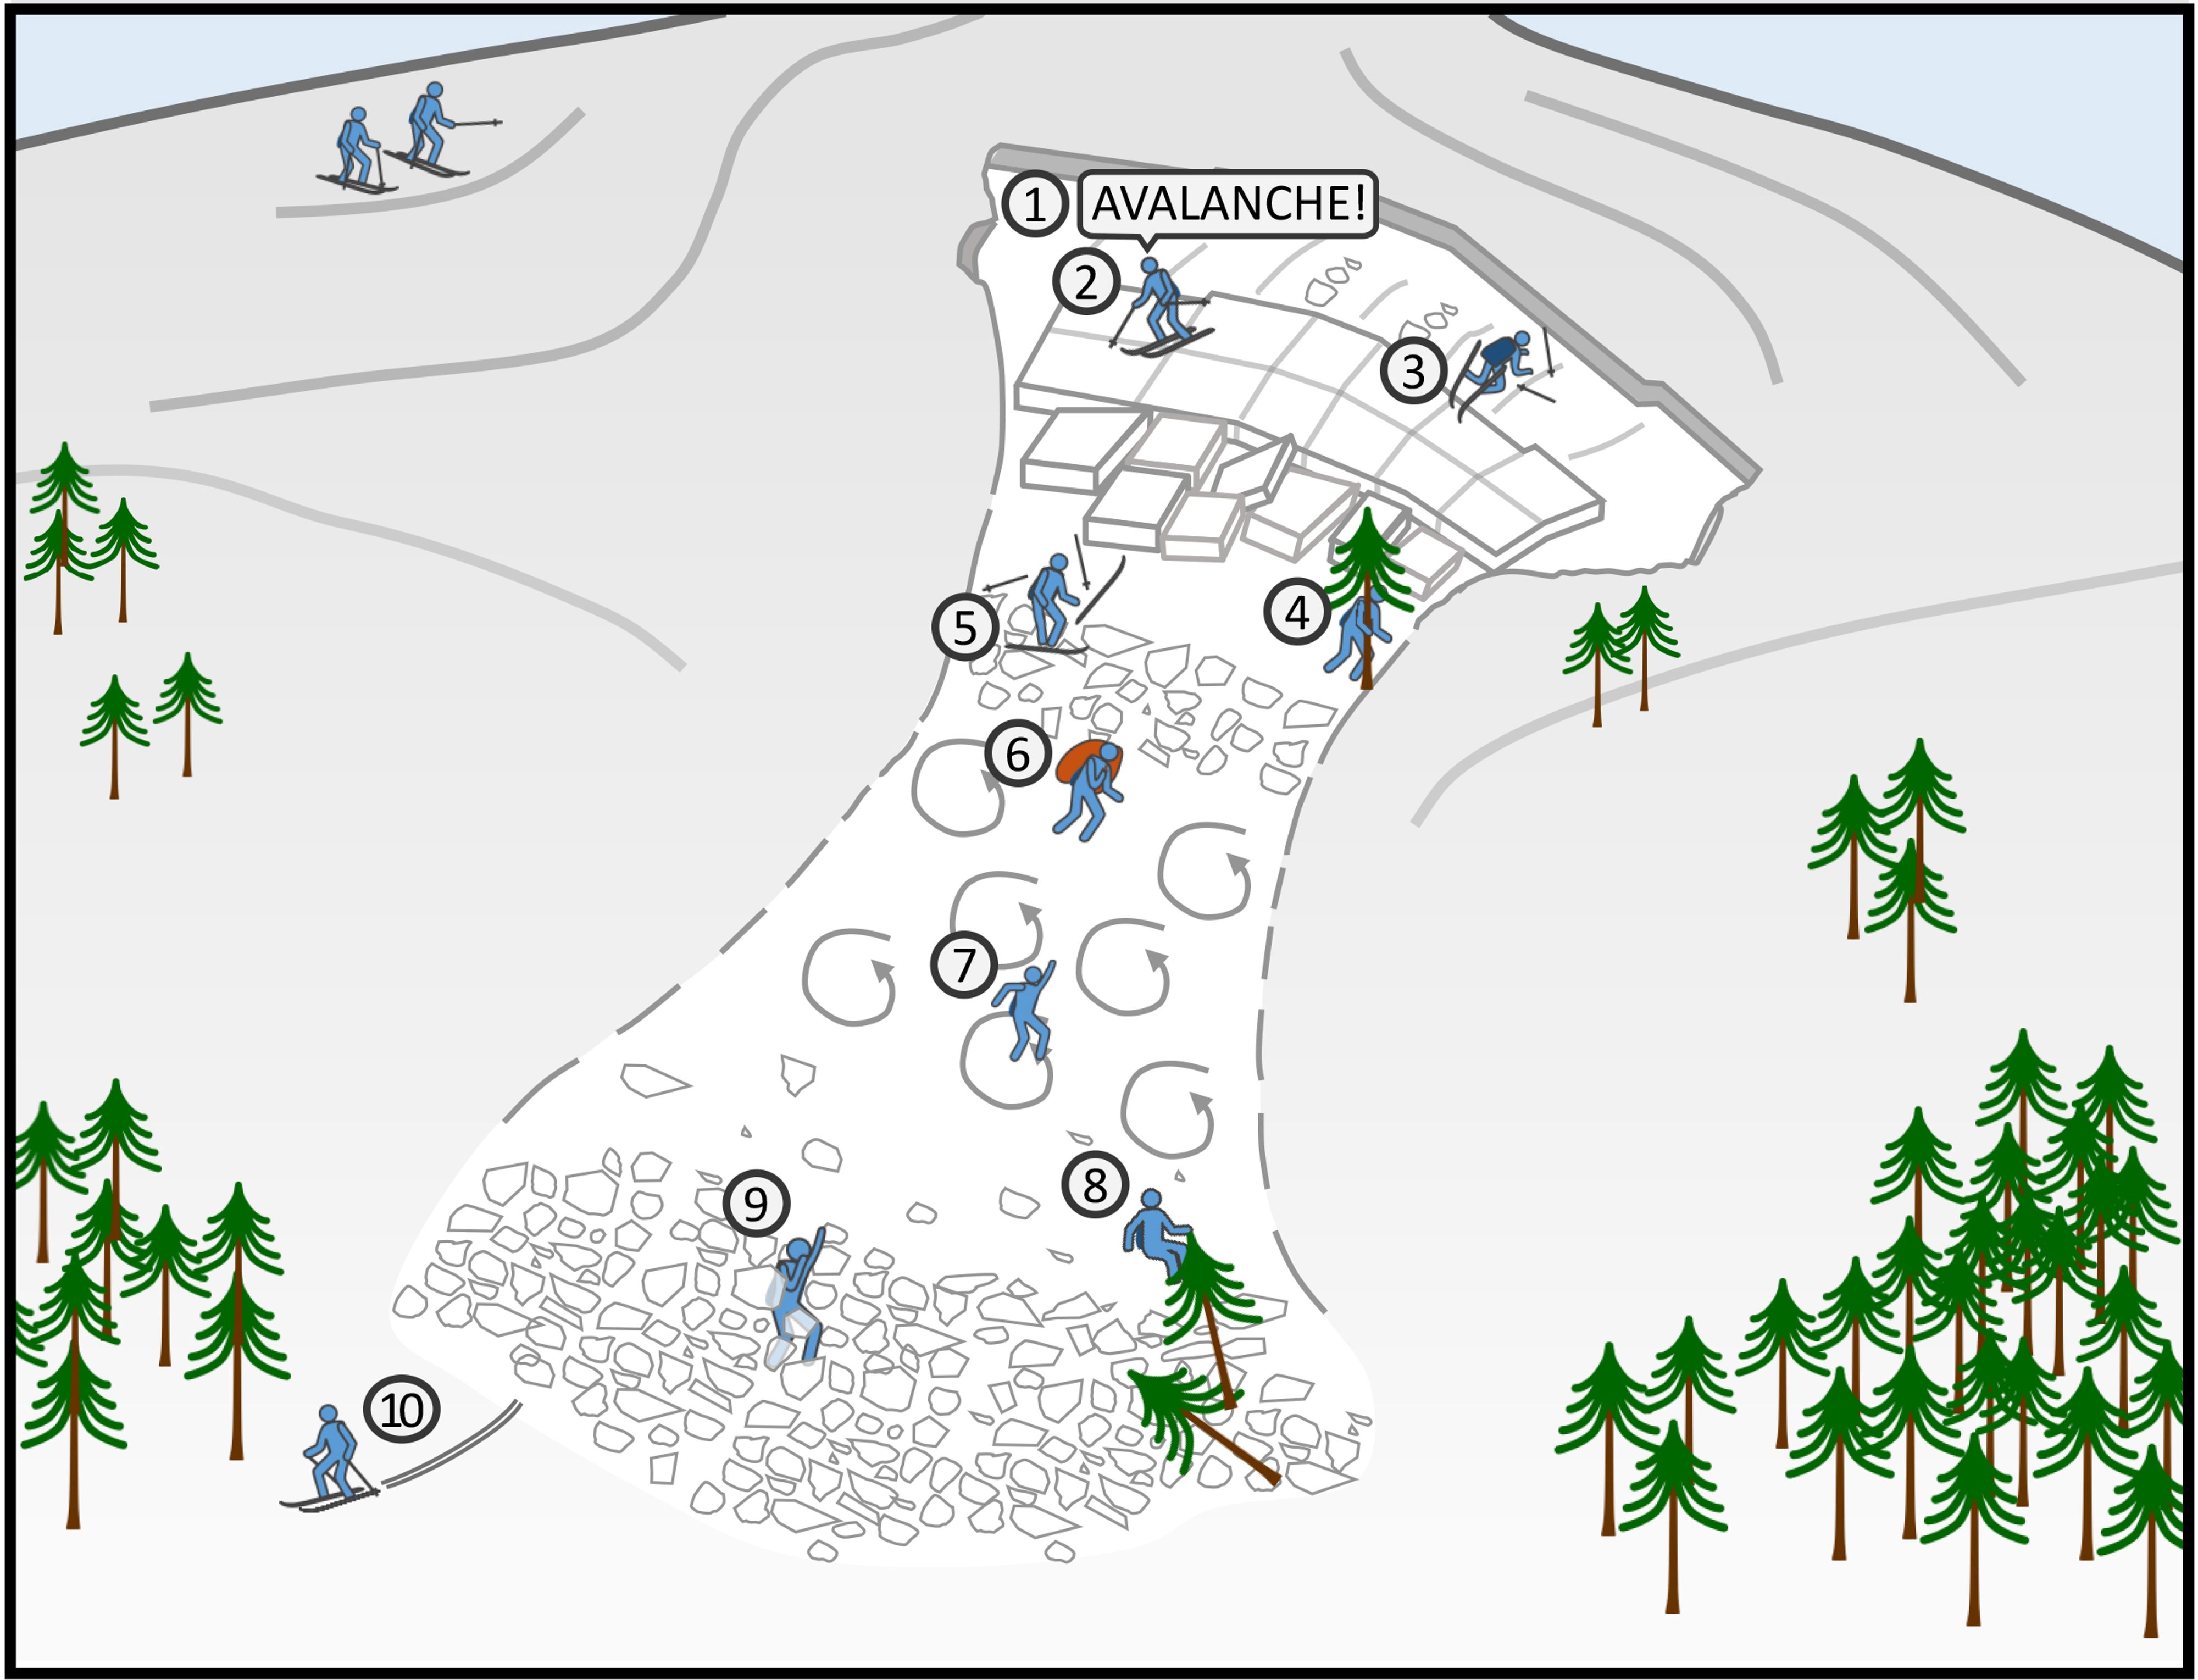 Diagram of how to survive an avalanche while skiing